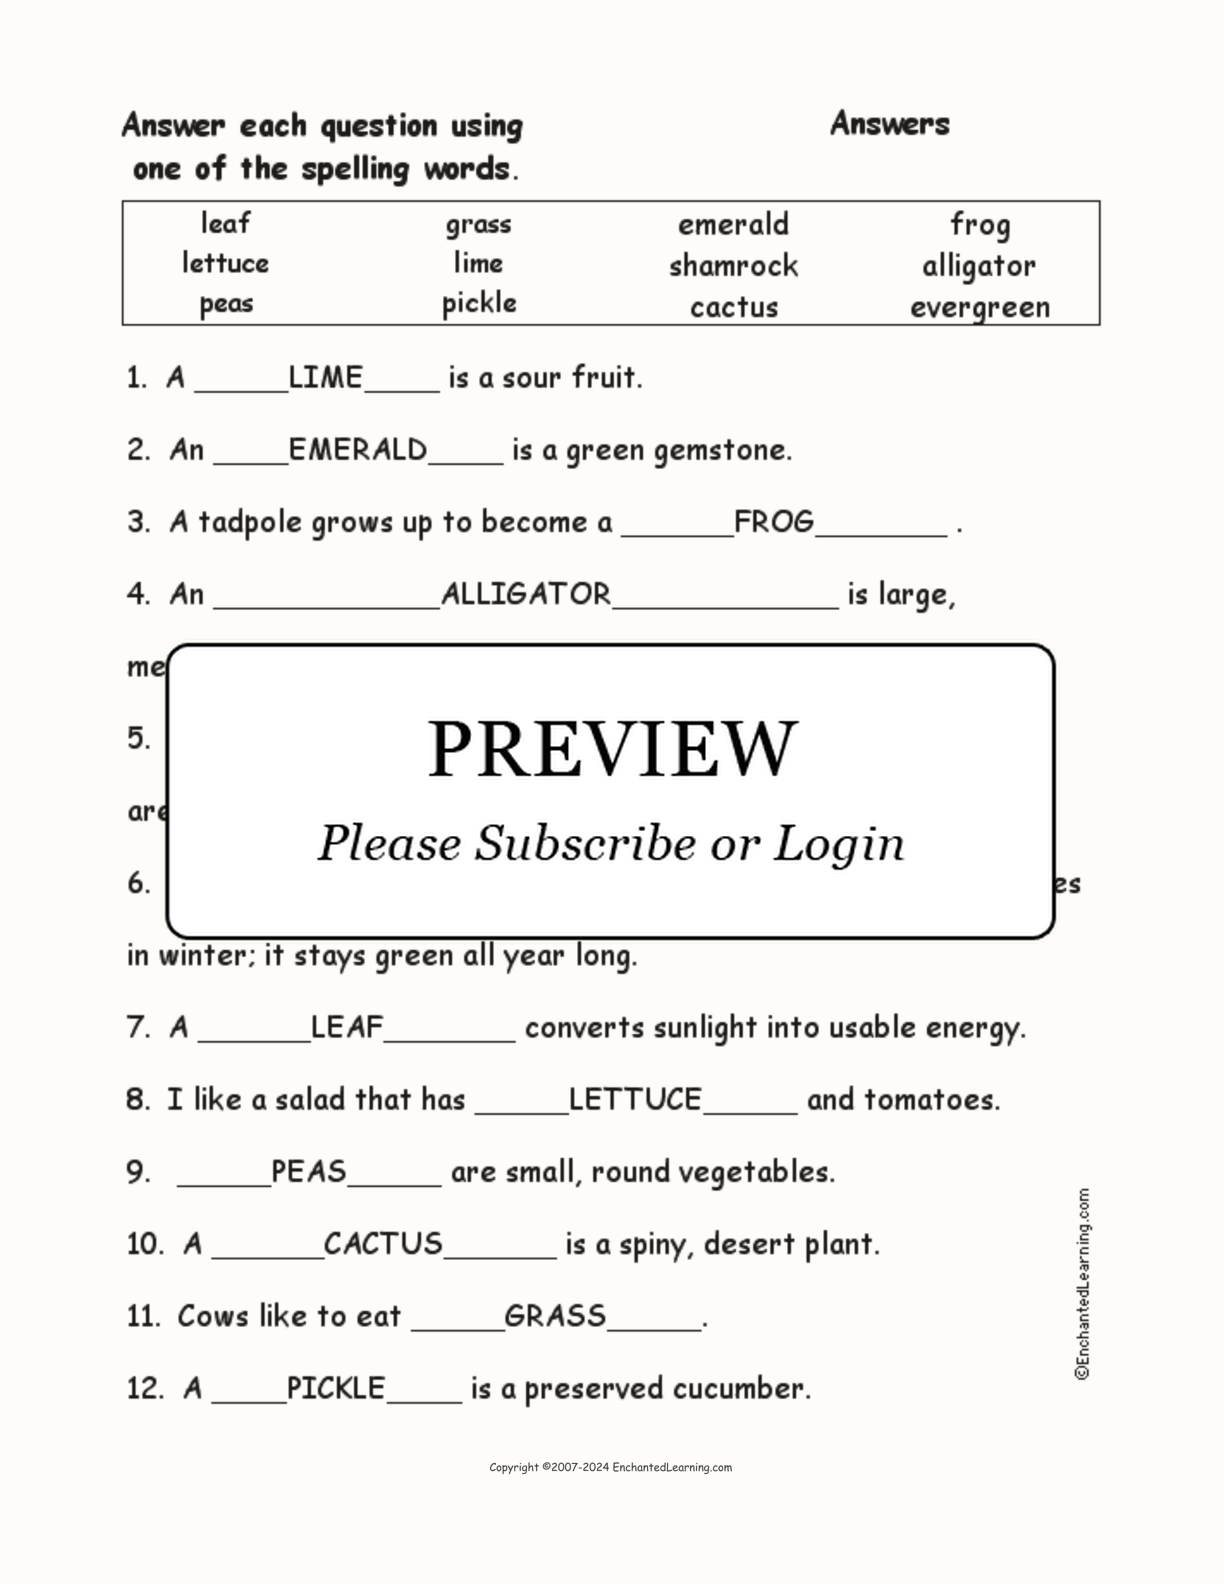 Spelling Word Questions: Green Things interactive worksheet page 2